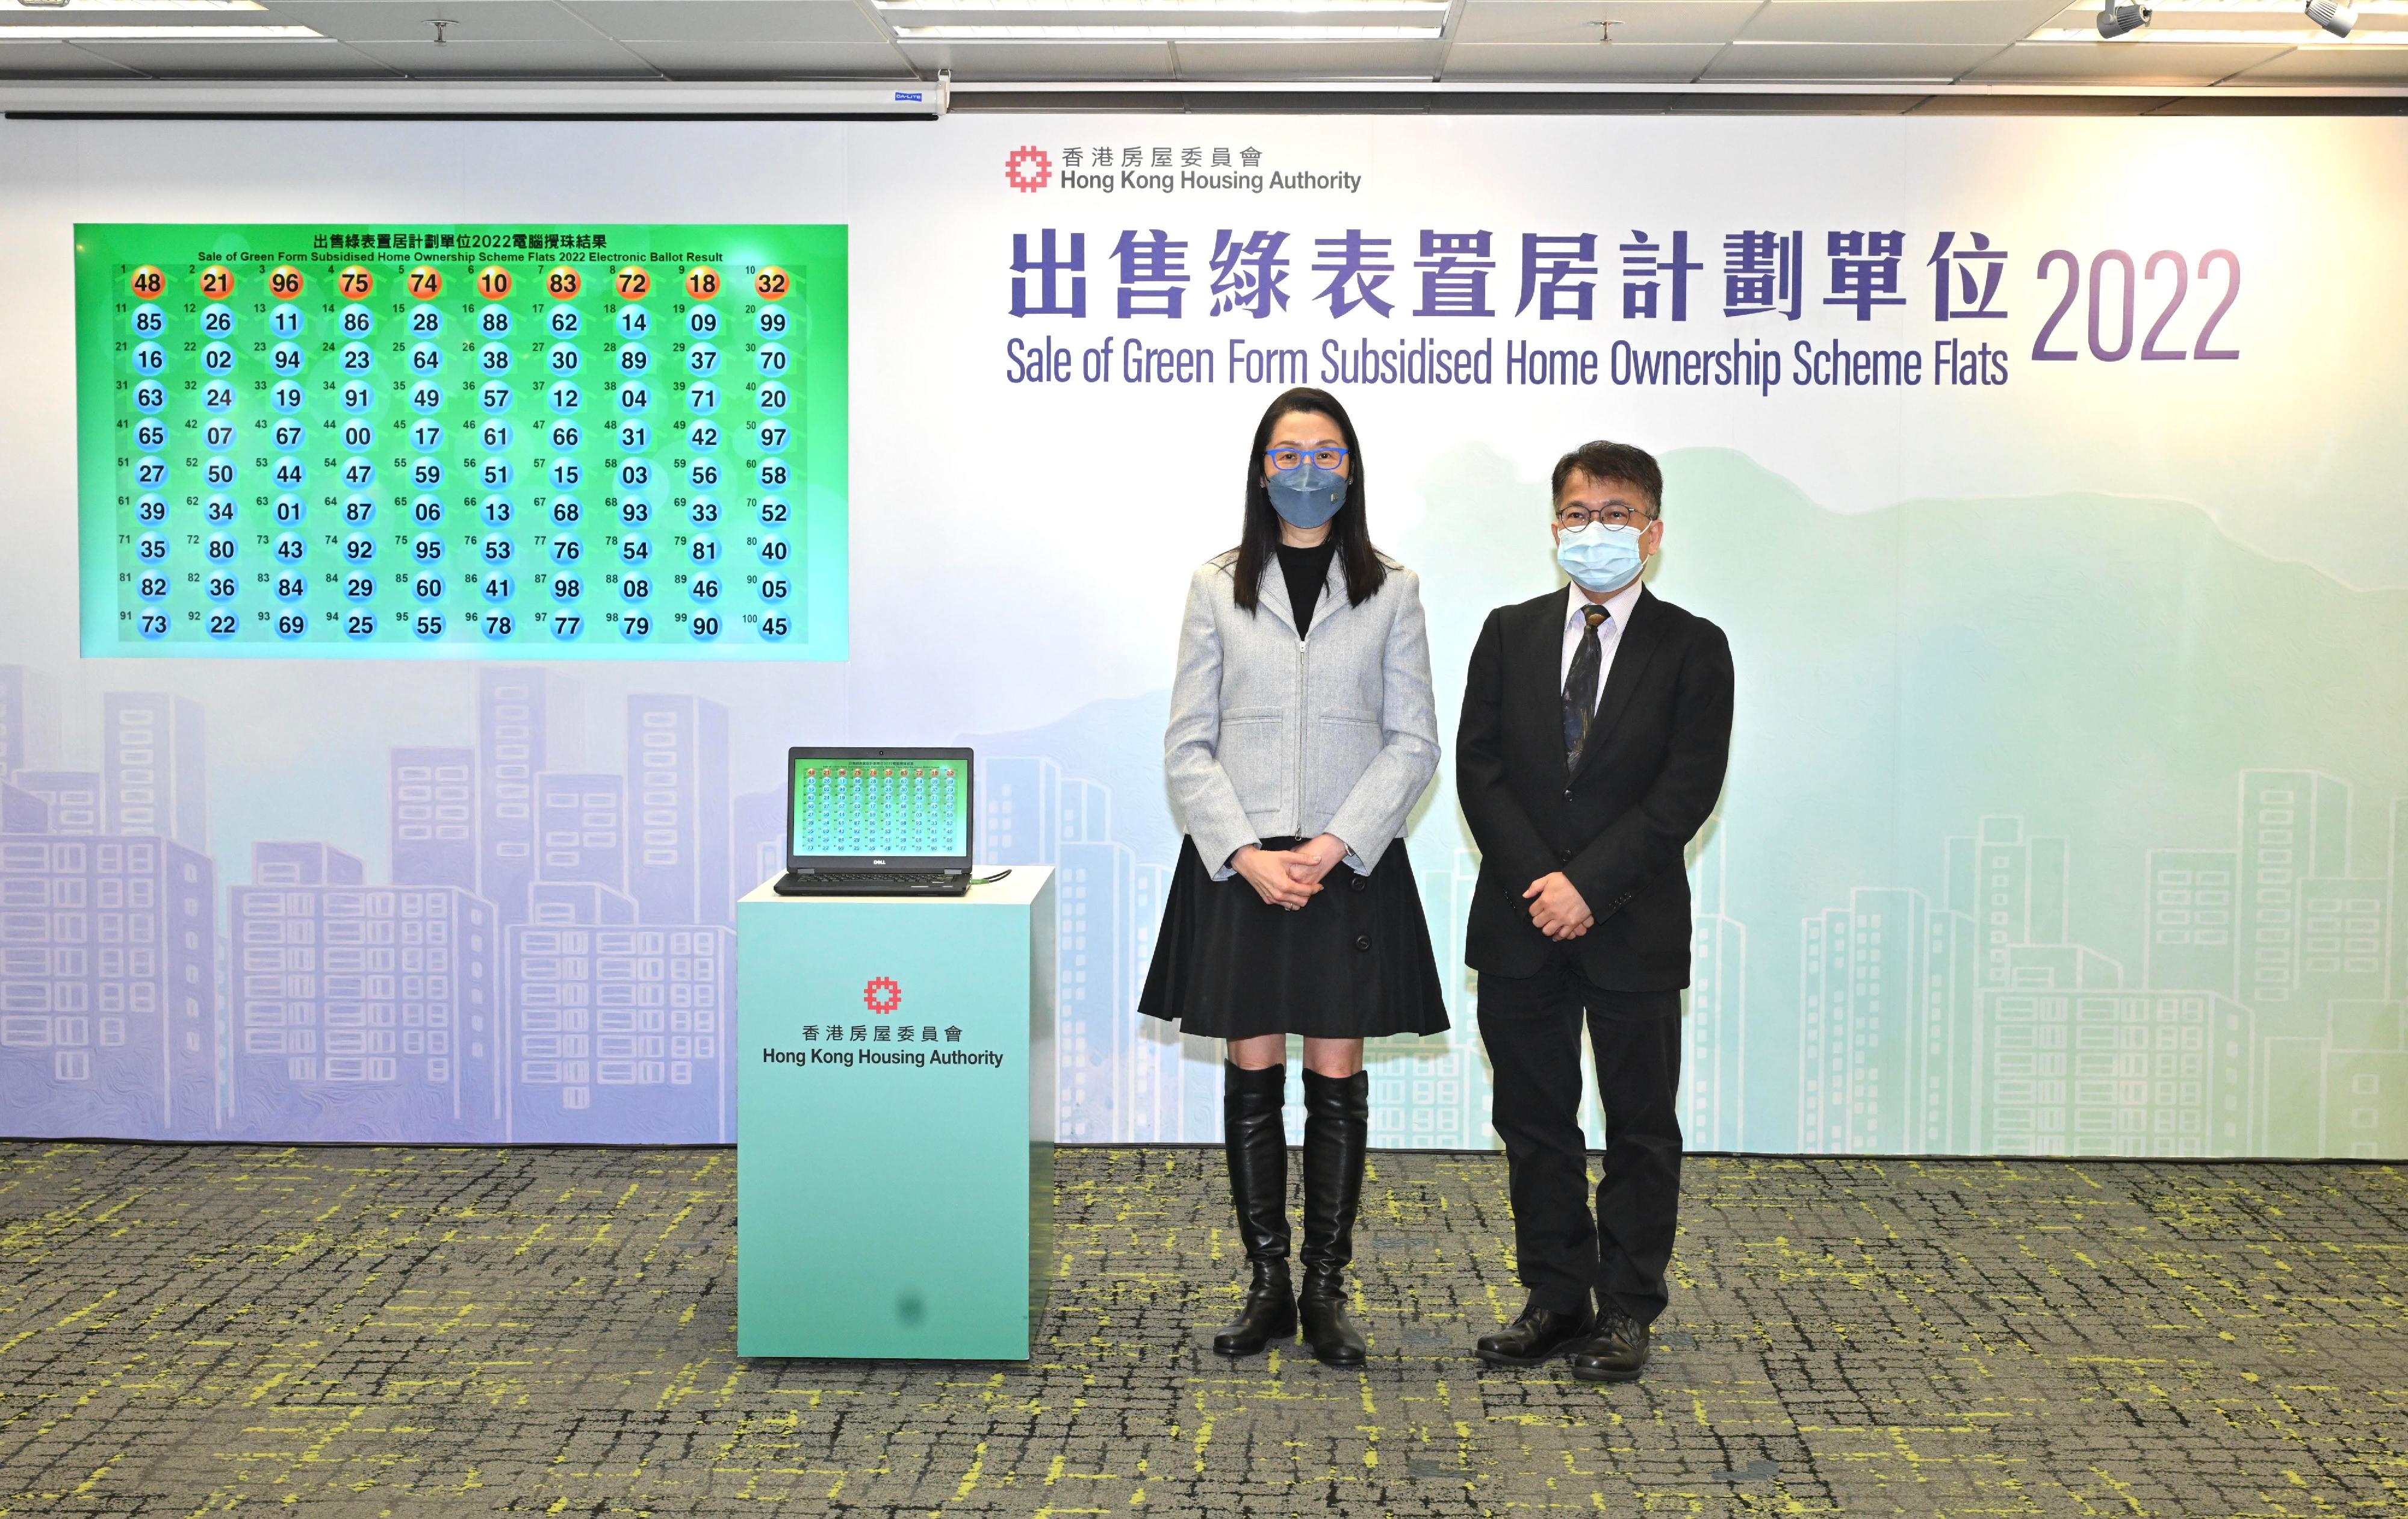 The Chairman of the Subsidised Housing Committee of the Hong Kong Housing Authority (HA), Ms Cleresa Wong (left), accompanied by the Assistant Director of Housing (Housing Subsidies), Mr Kenneth Leung, officiates at the electronic ballot drawing ceremony today (December 8) for the HA's Sale of Green Form Subsidised Home Ownership Scheme Flats 2022 to determine the priority sequence based on the last two digits of the application numbers.